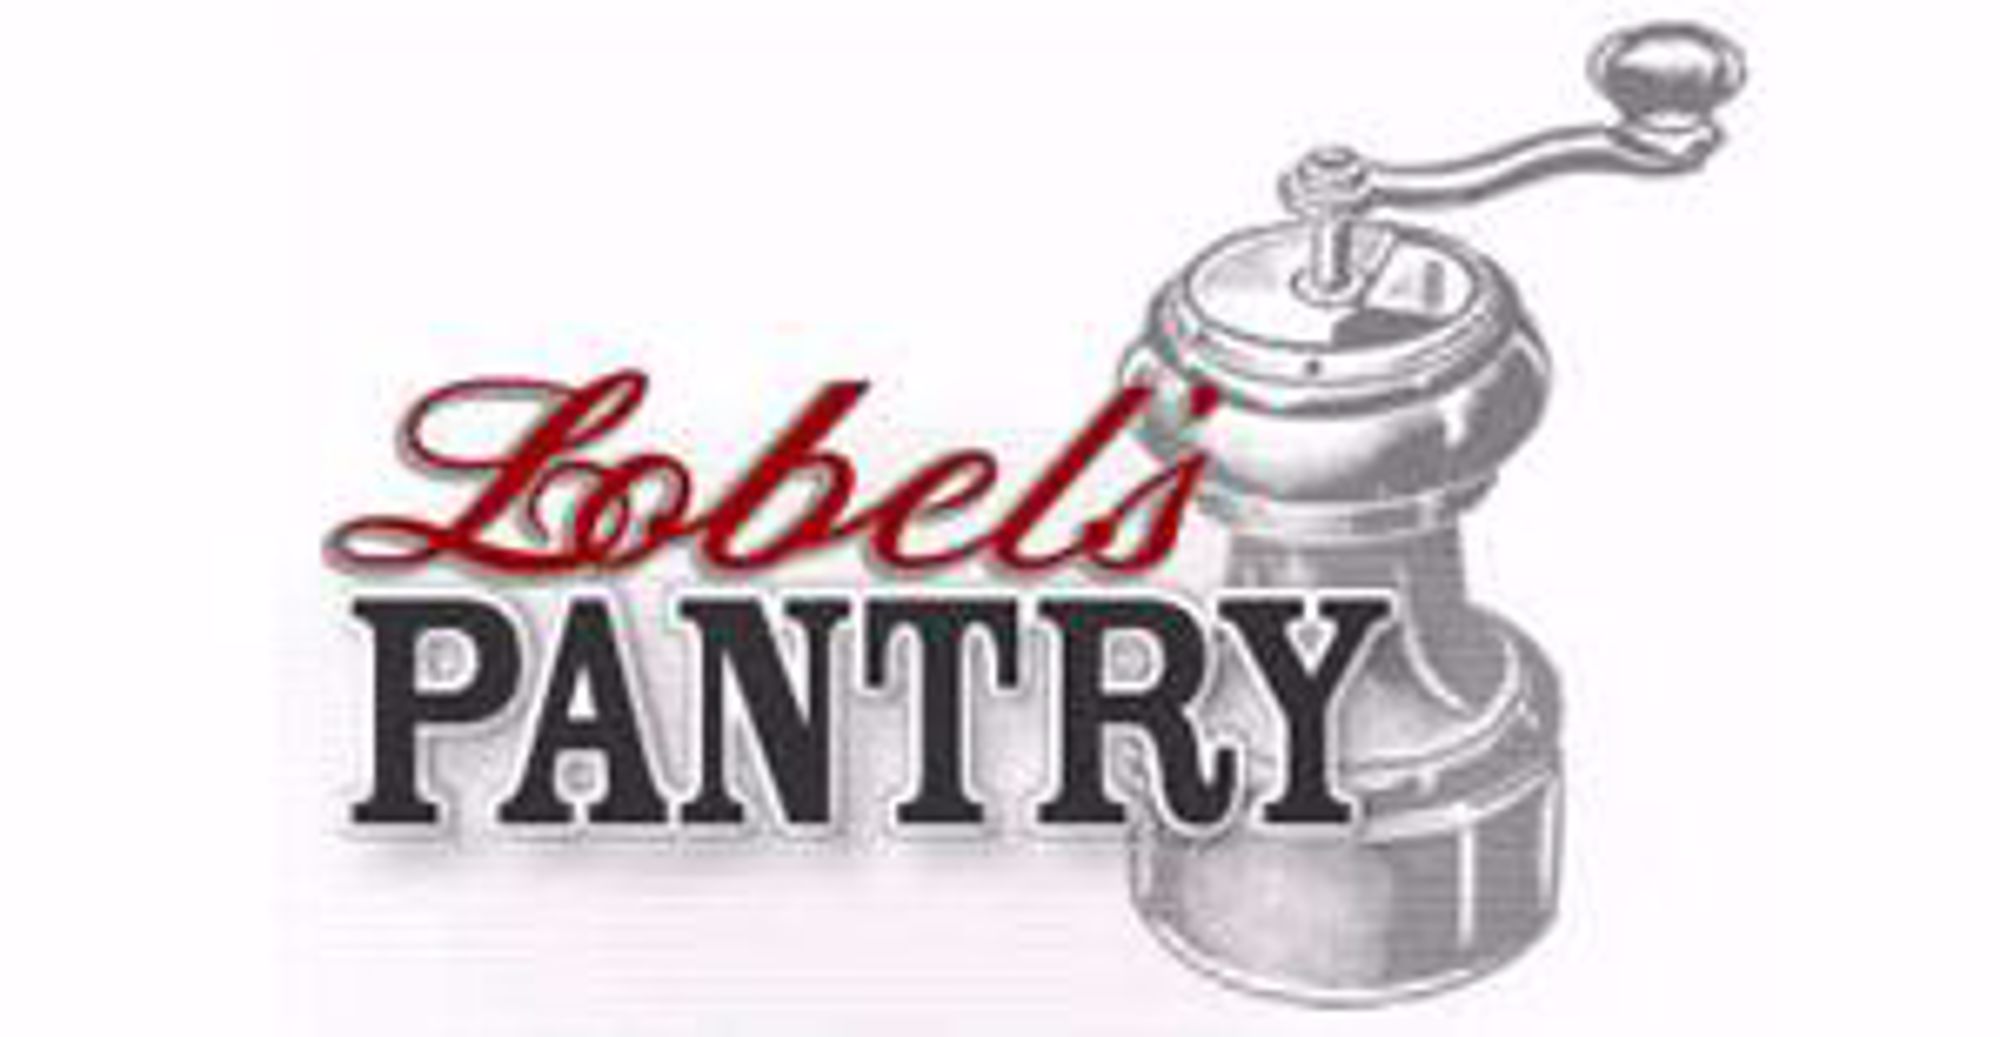 Picture for category Lobel's Pantry